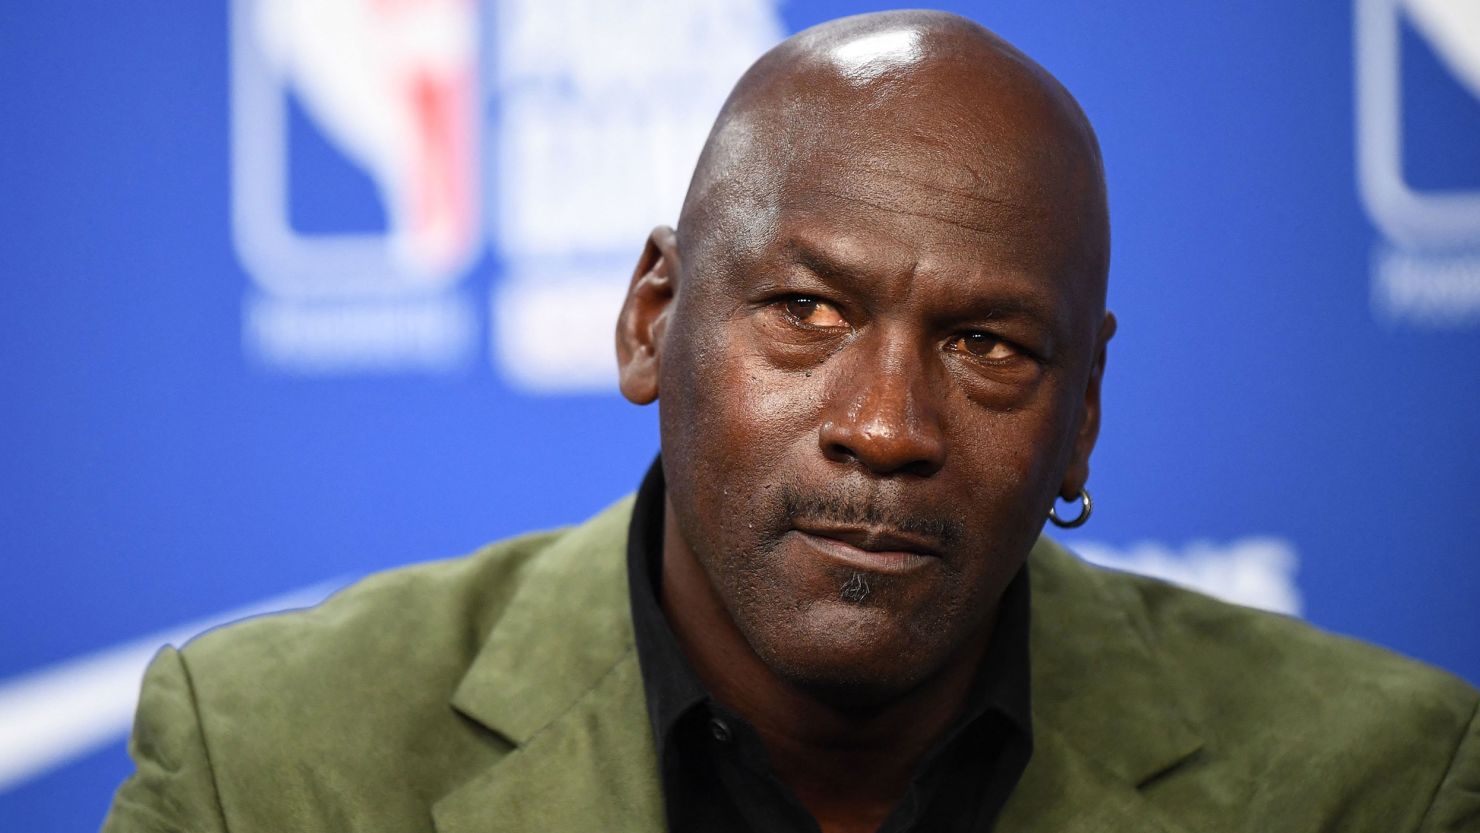 Former NBA star Michael Jordan has reached an agreement to sell his majority stake in the Charlotte Hornets.